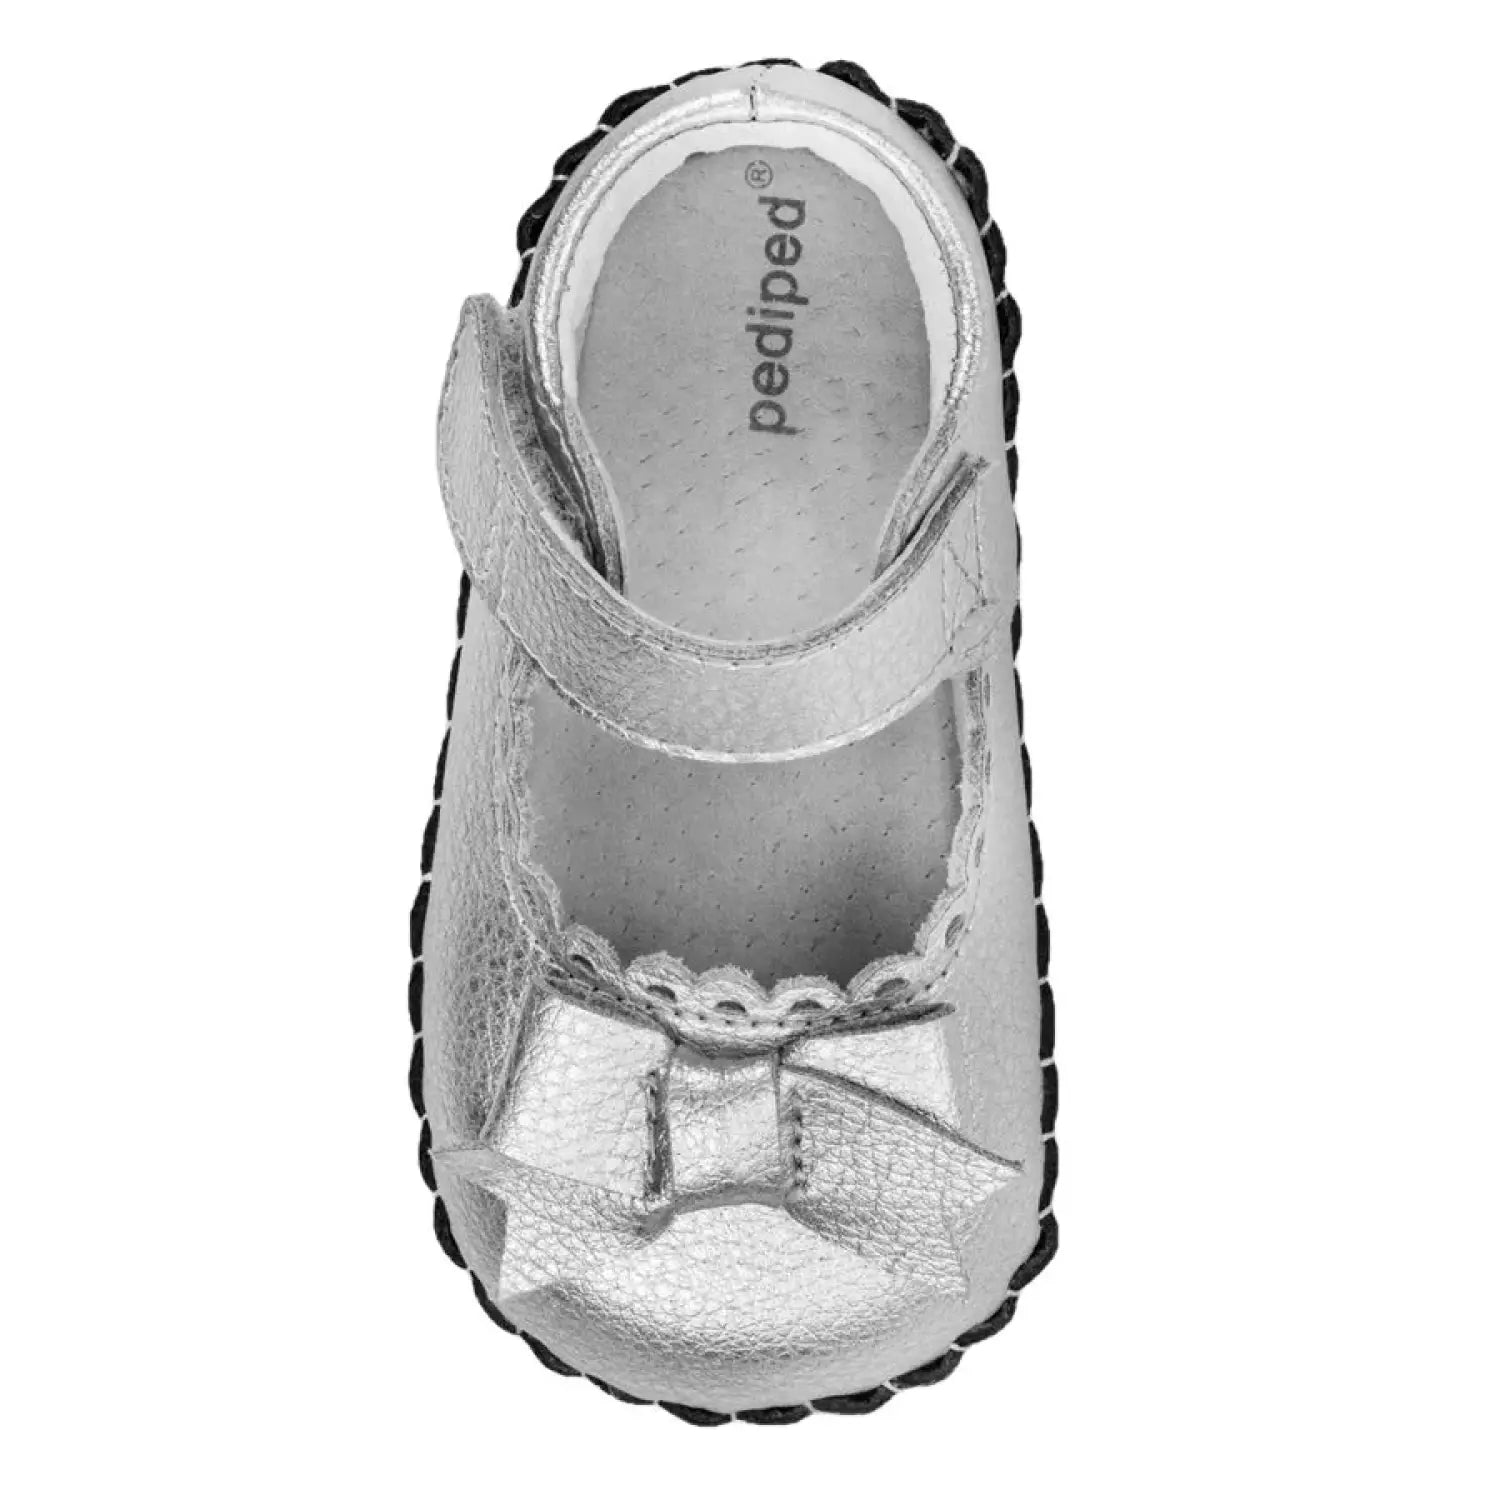 Pediped Originals® Betty Silver color, top view shown. Silver with bow on top.